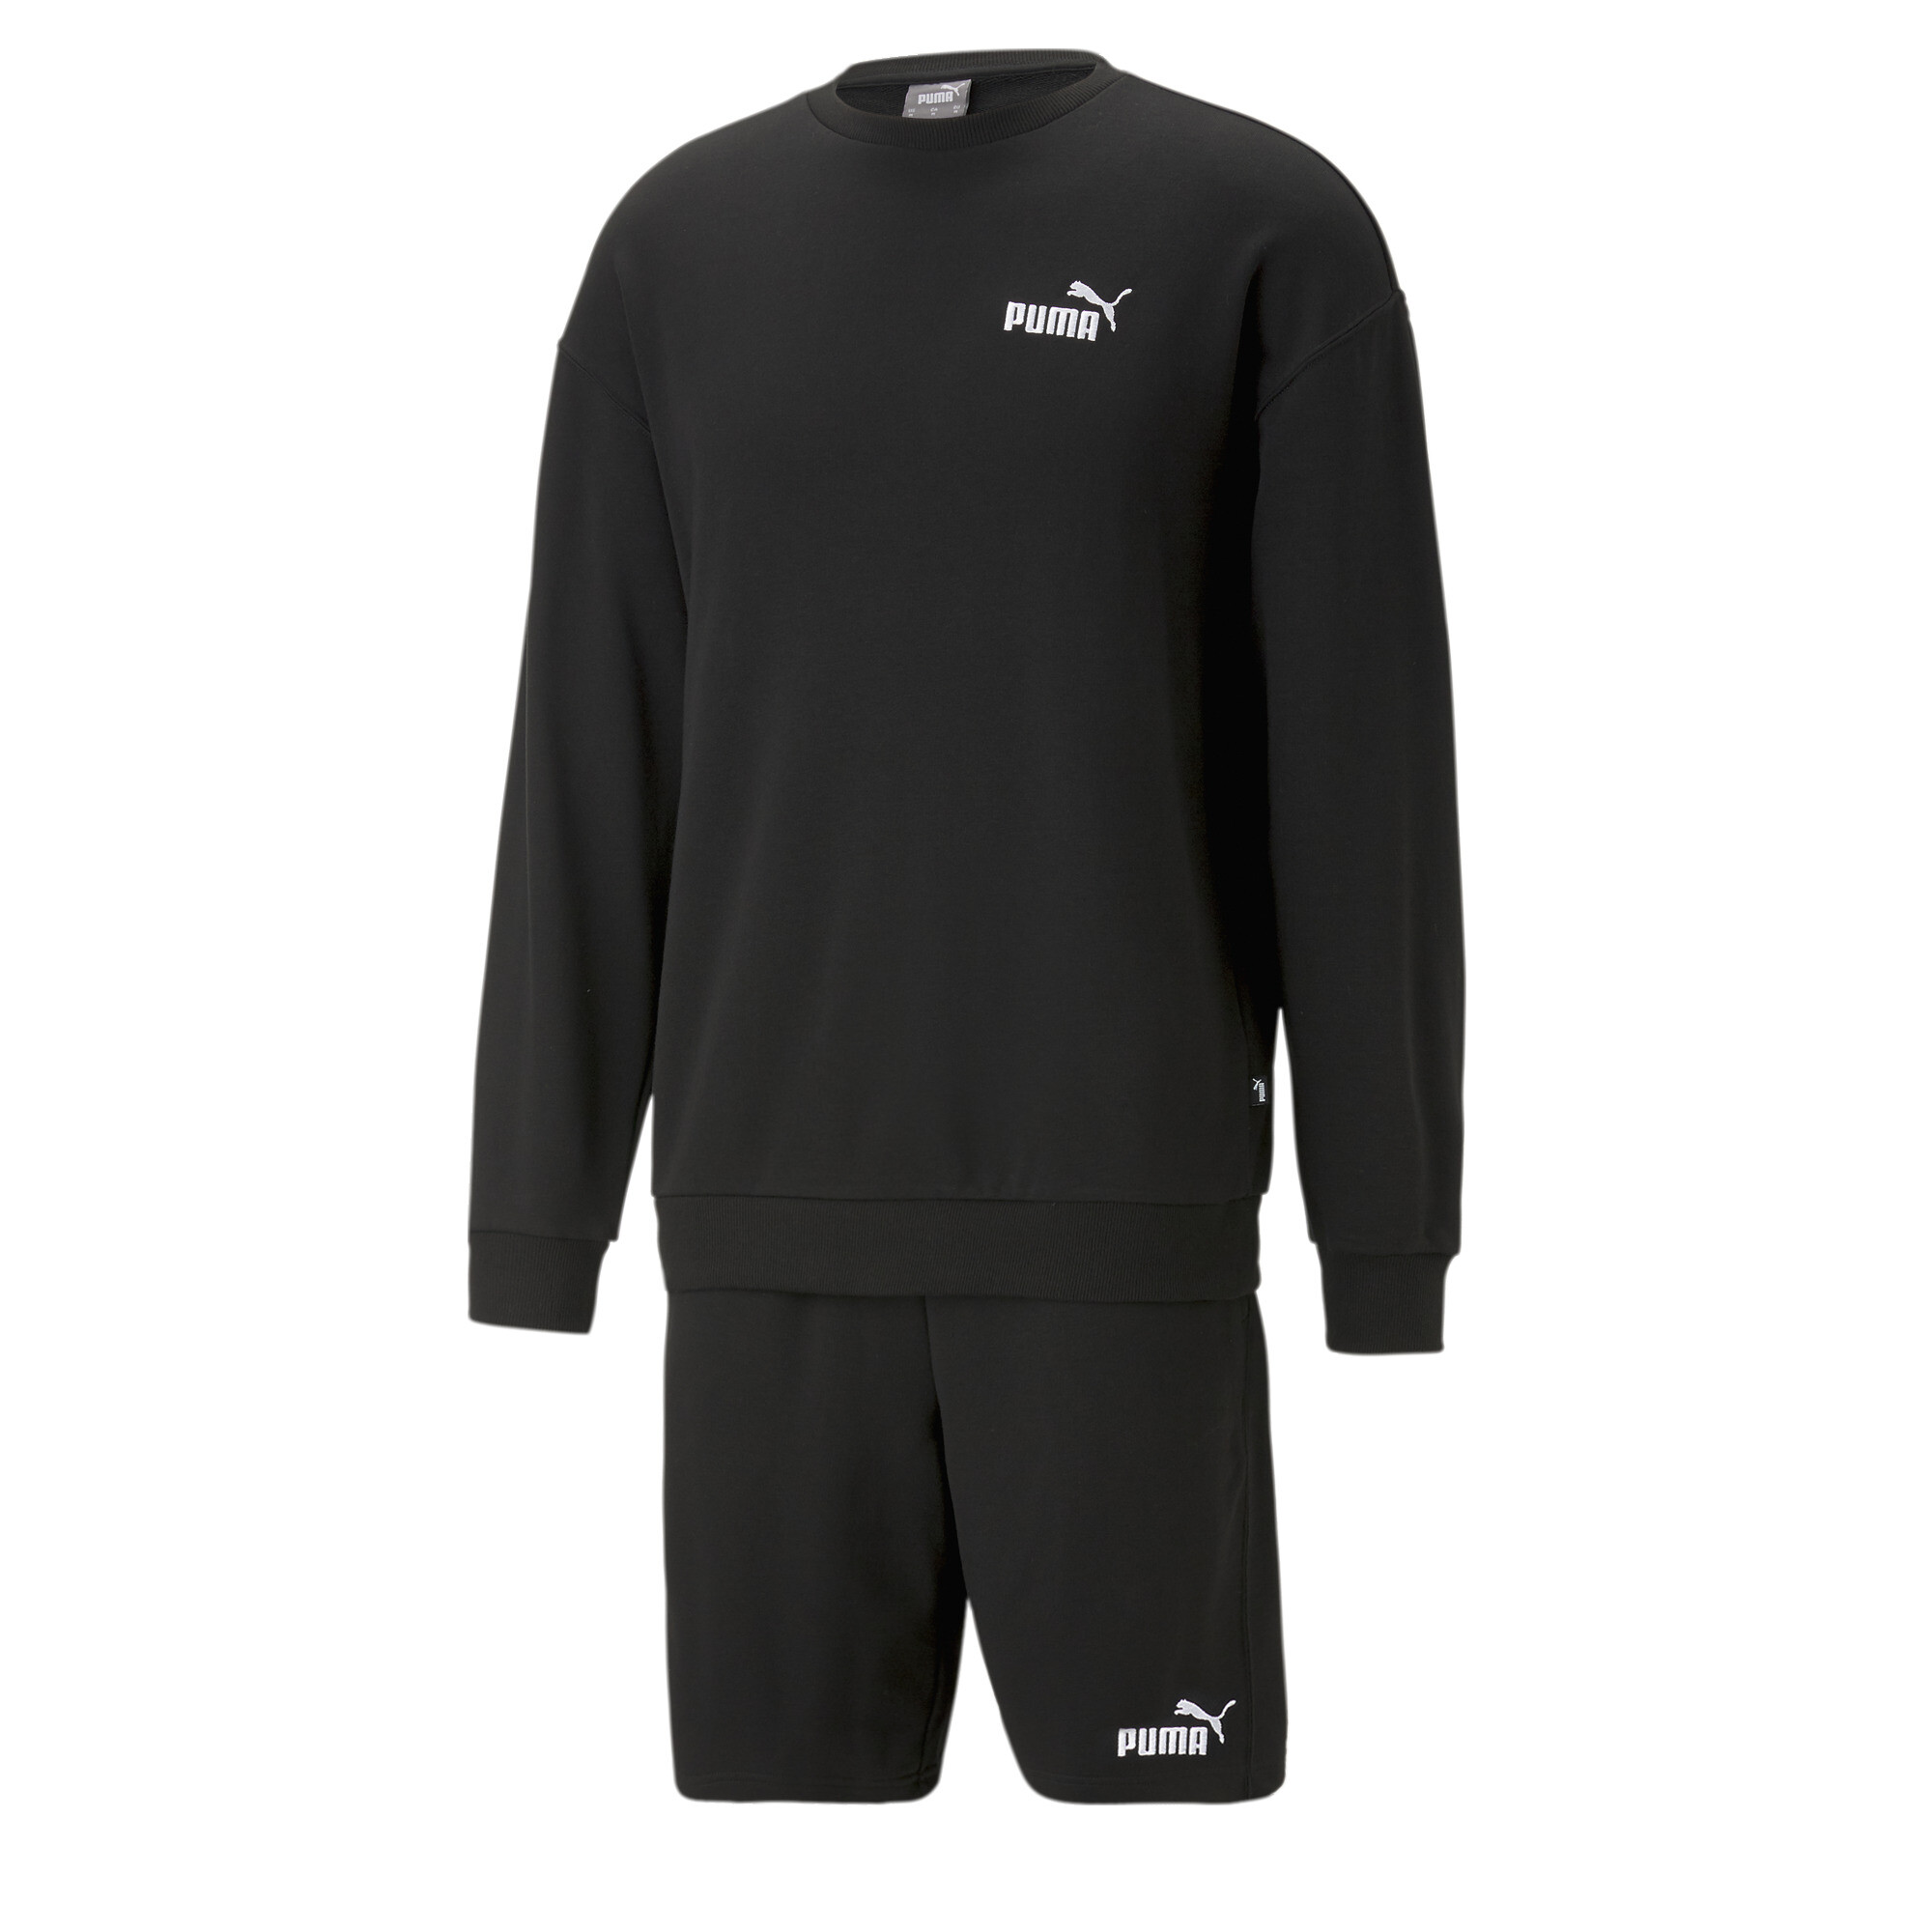 Men's Puma Relaxed Sweatsuit, Black, Size S, Clothing